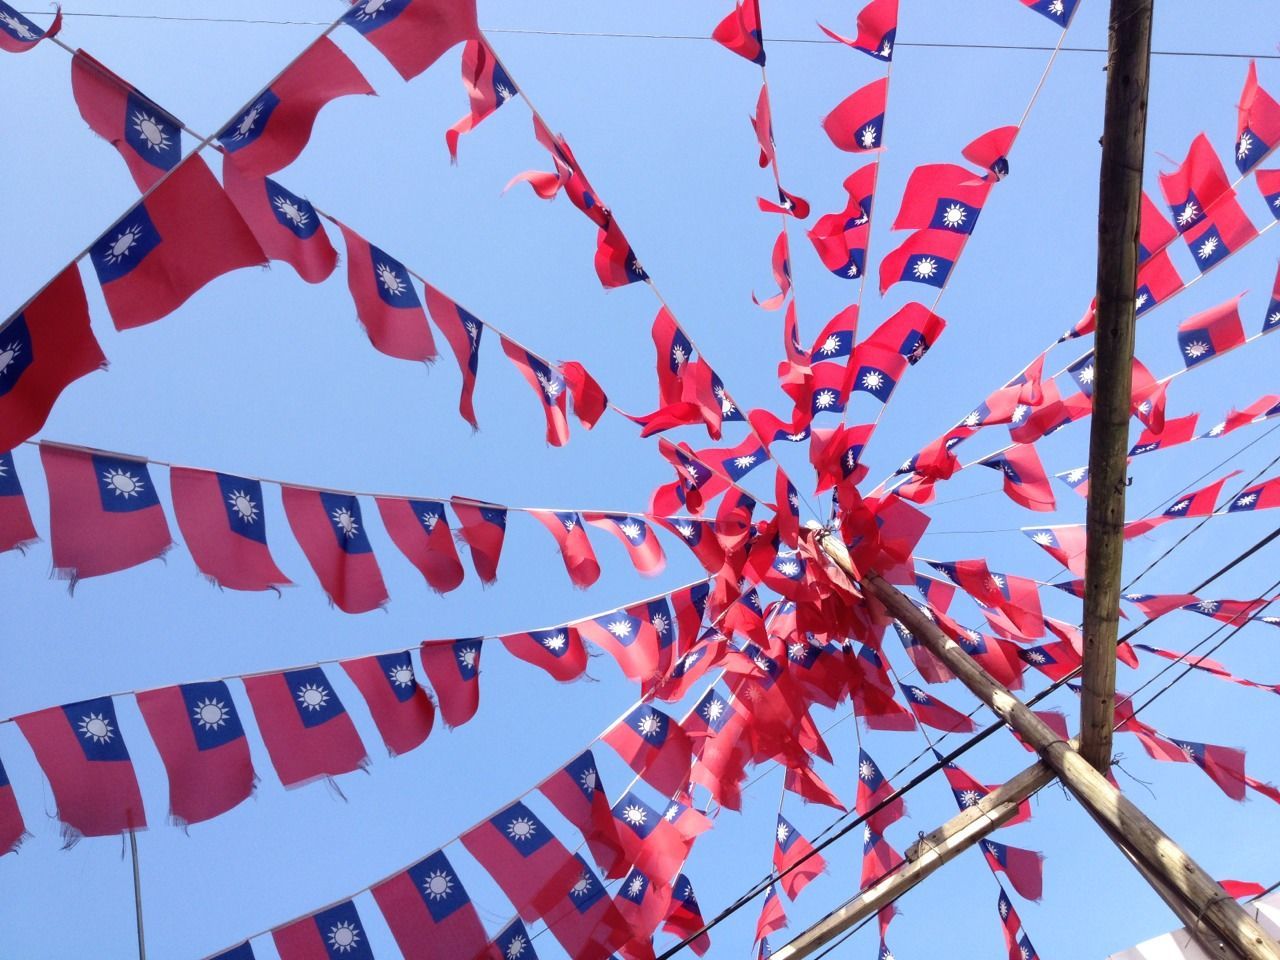 Red and blue bunting against blue sky